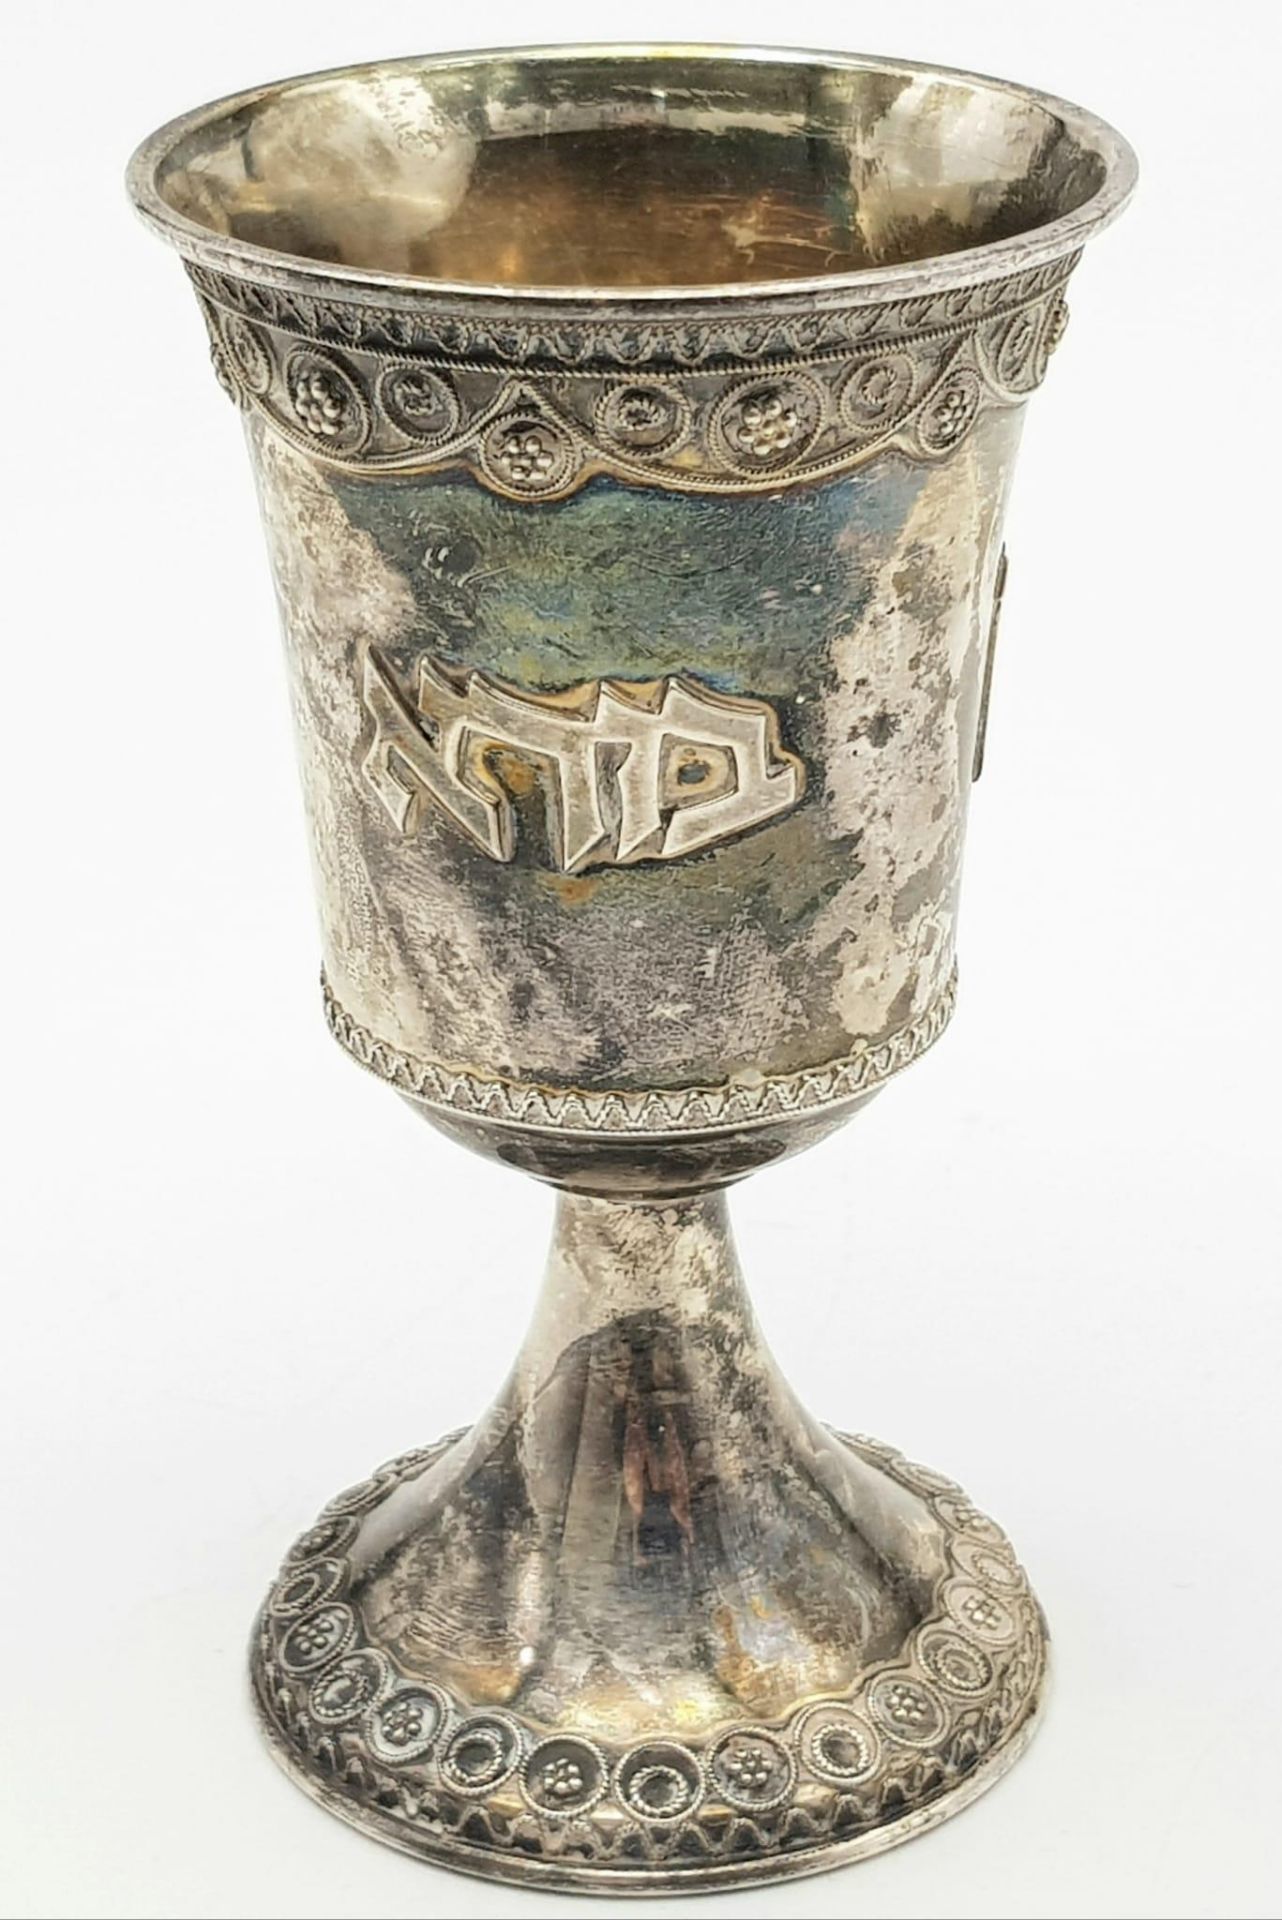 A SOLID SILVER KIDDISH CUP WITH THE BLESSING FOR WINE WRITTEN AROUND IT. 57.8gms 10cms TALL - Image 4 of 13